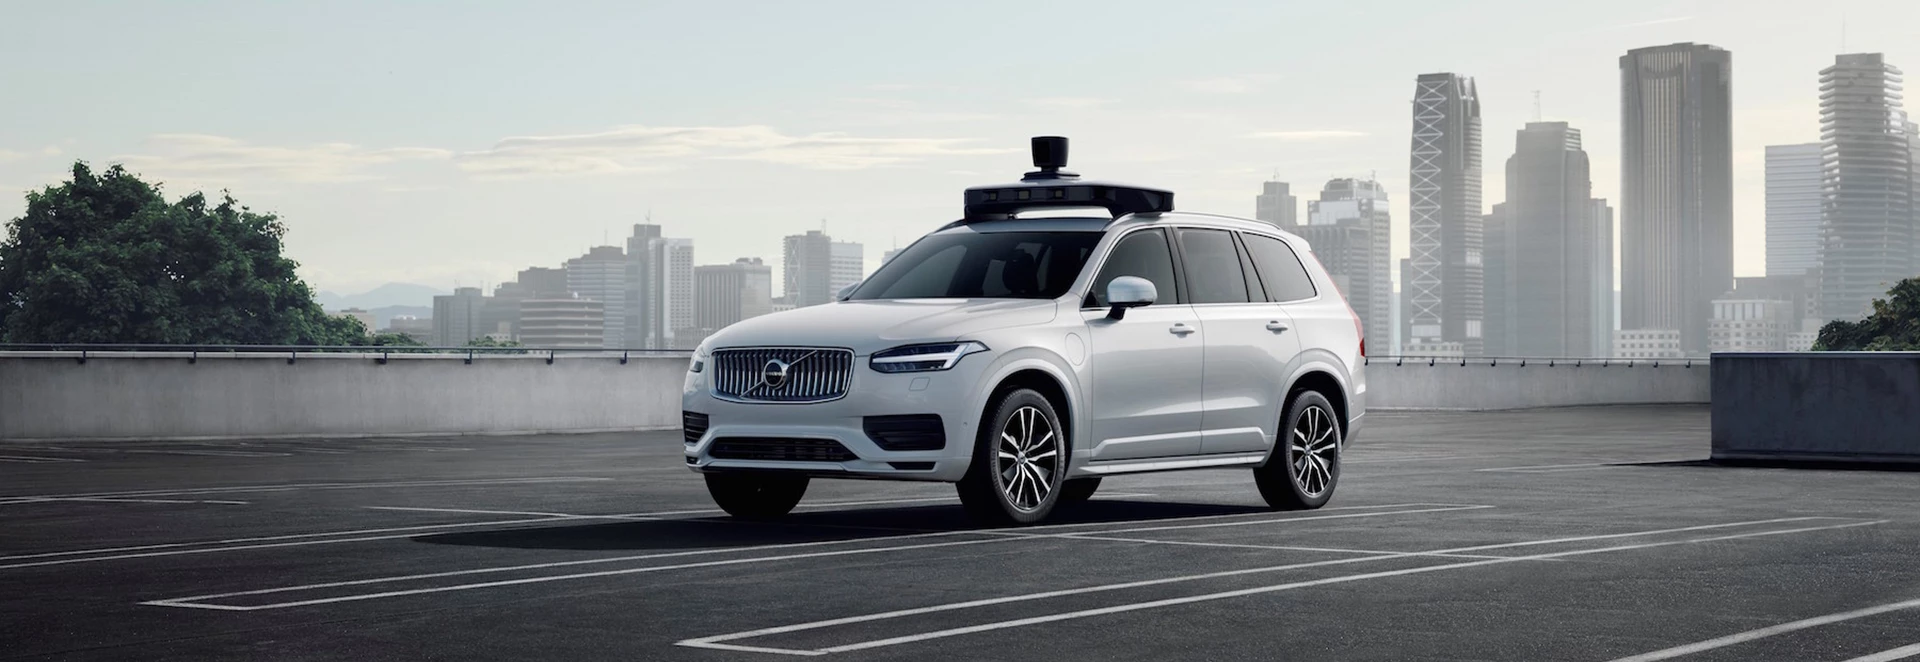 Volvo and Uber present production-ready self-driving car 